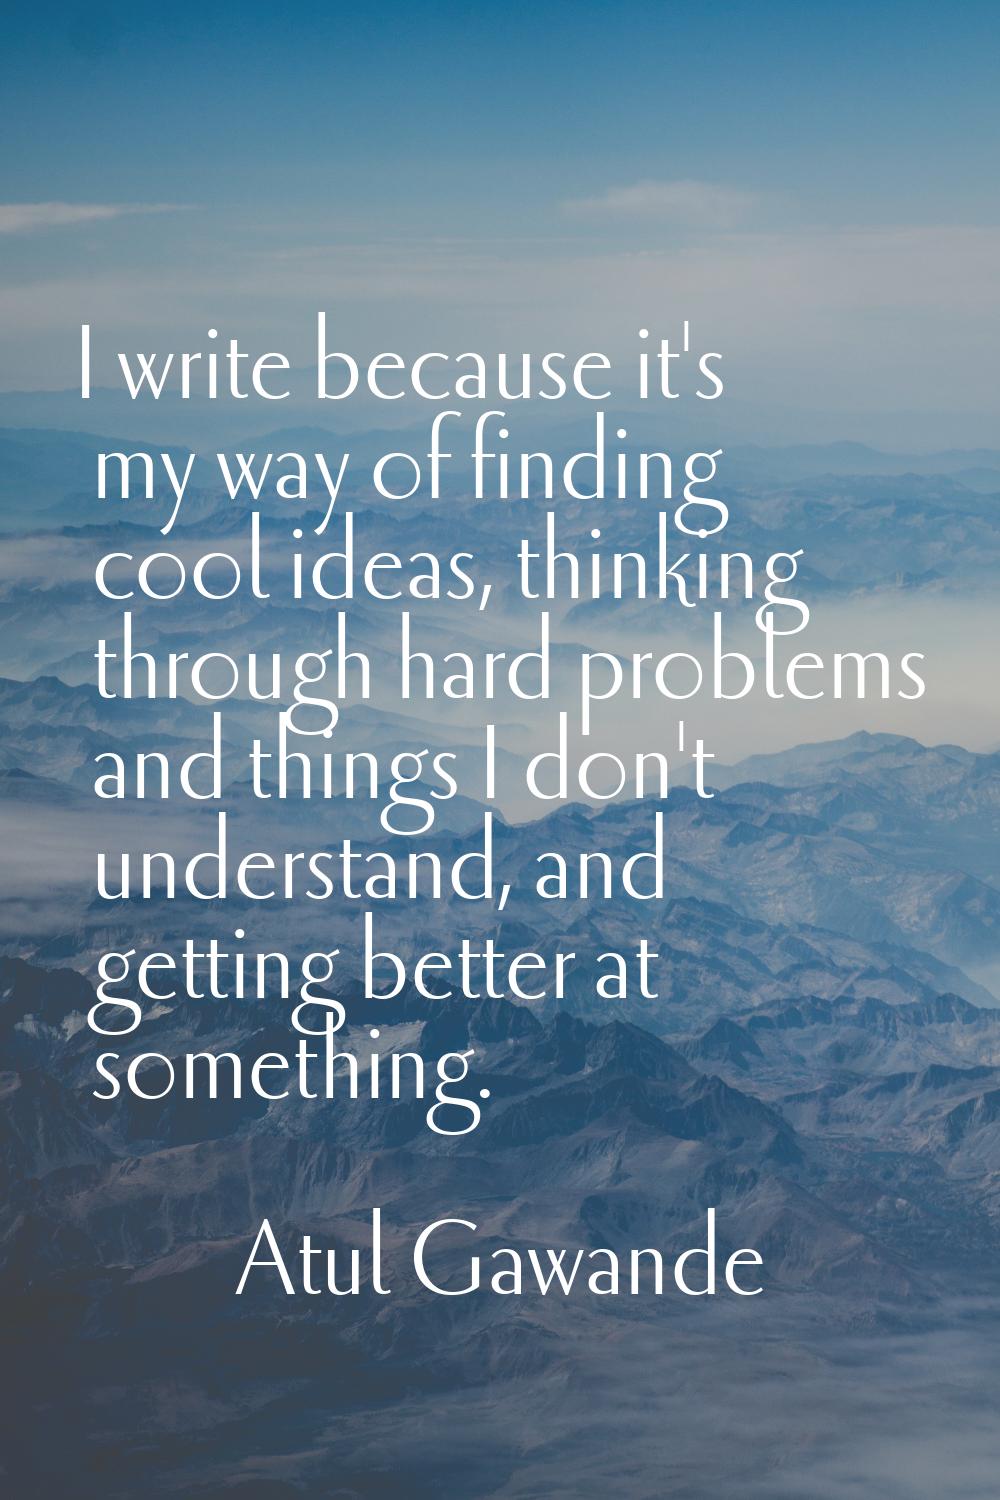 I write because it's my way of finding cool ideas, thinking through hard problems and things I don'